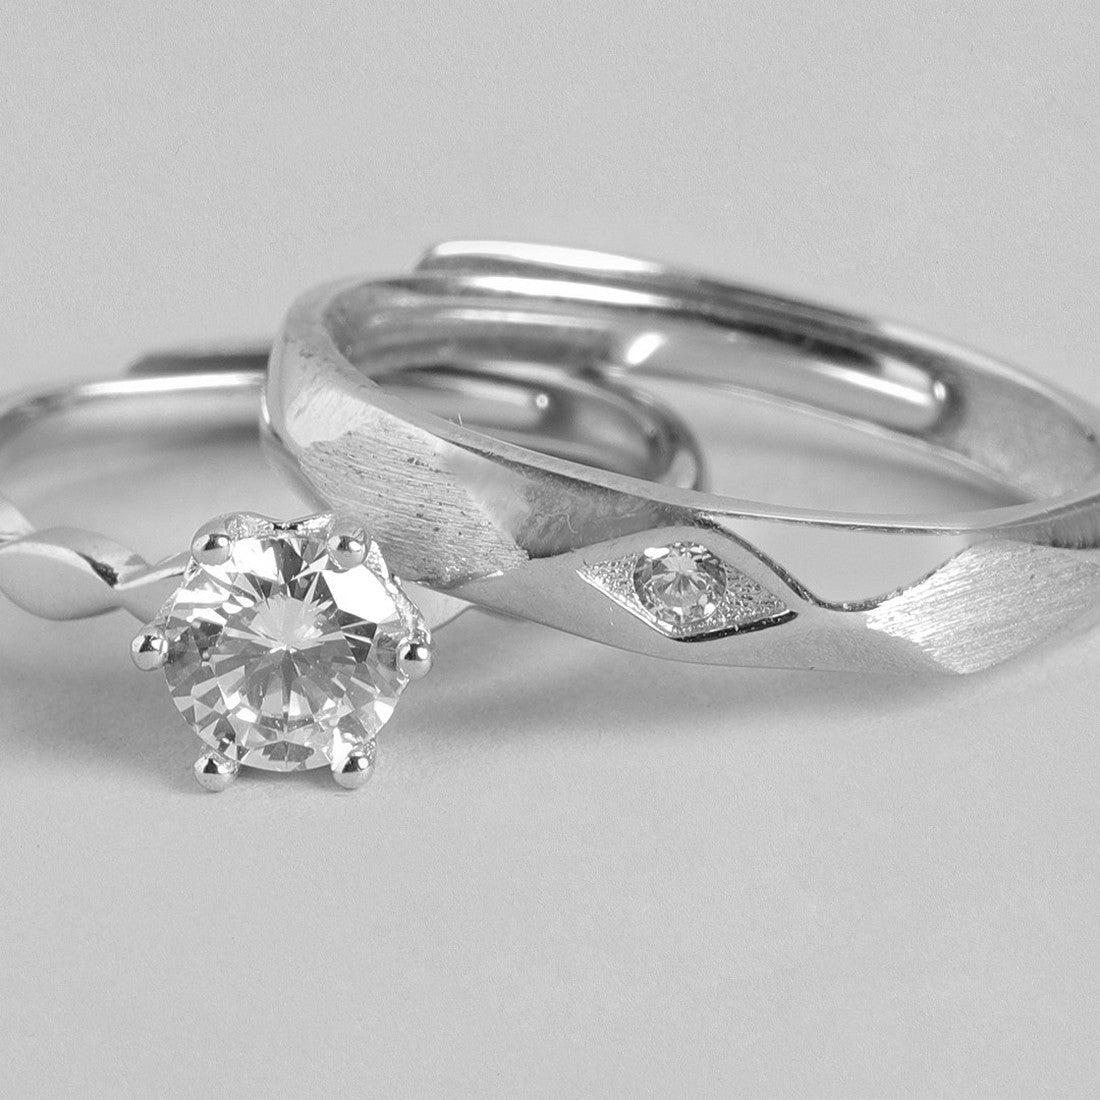 Eternally Bound Couple Rings 925 Silver Rings - Valentines Edition With Gift Box (Adjustable)